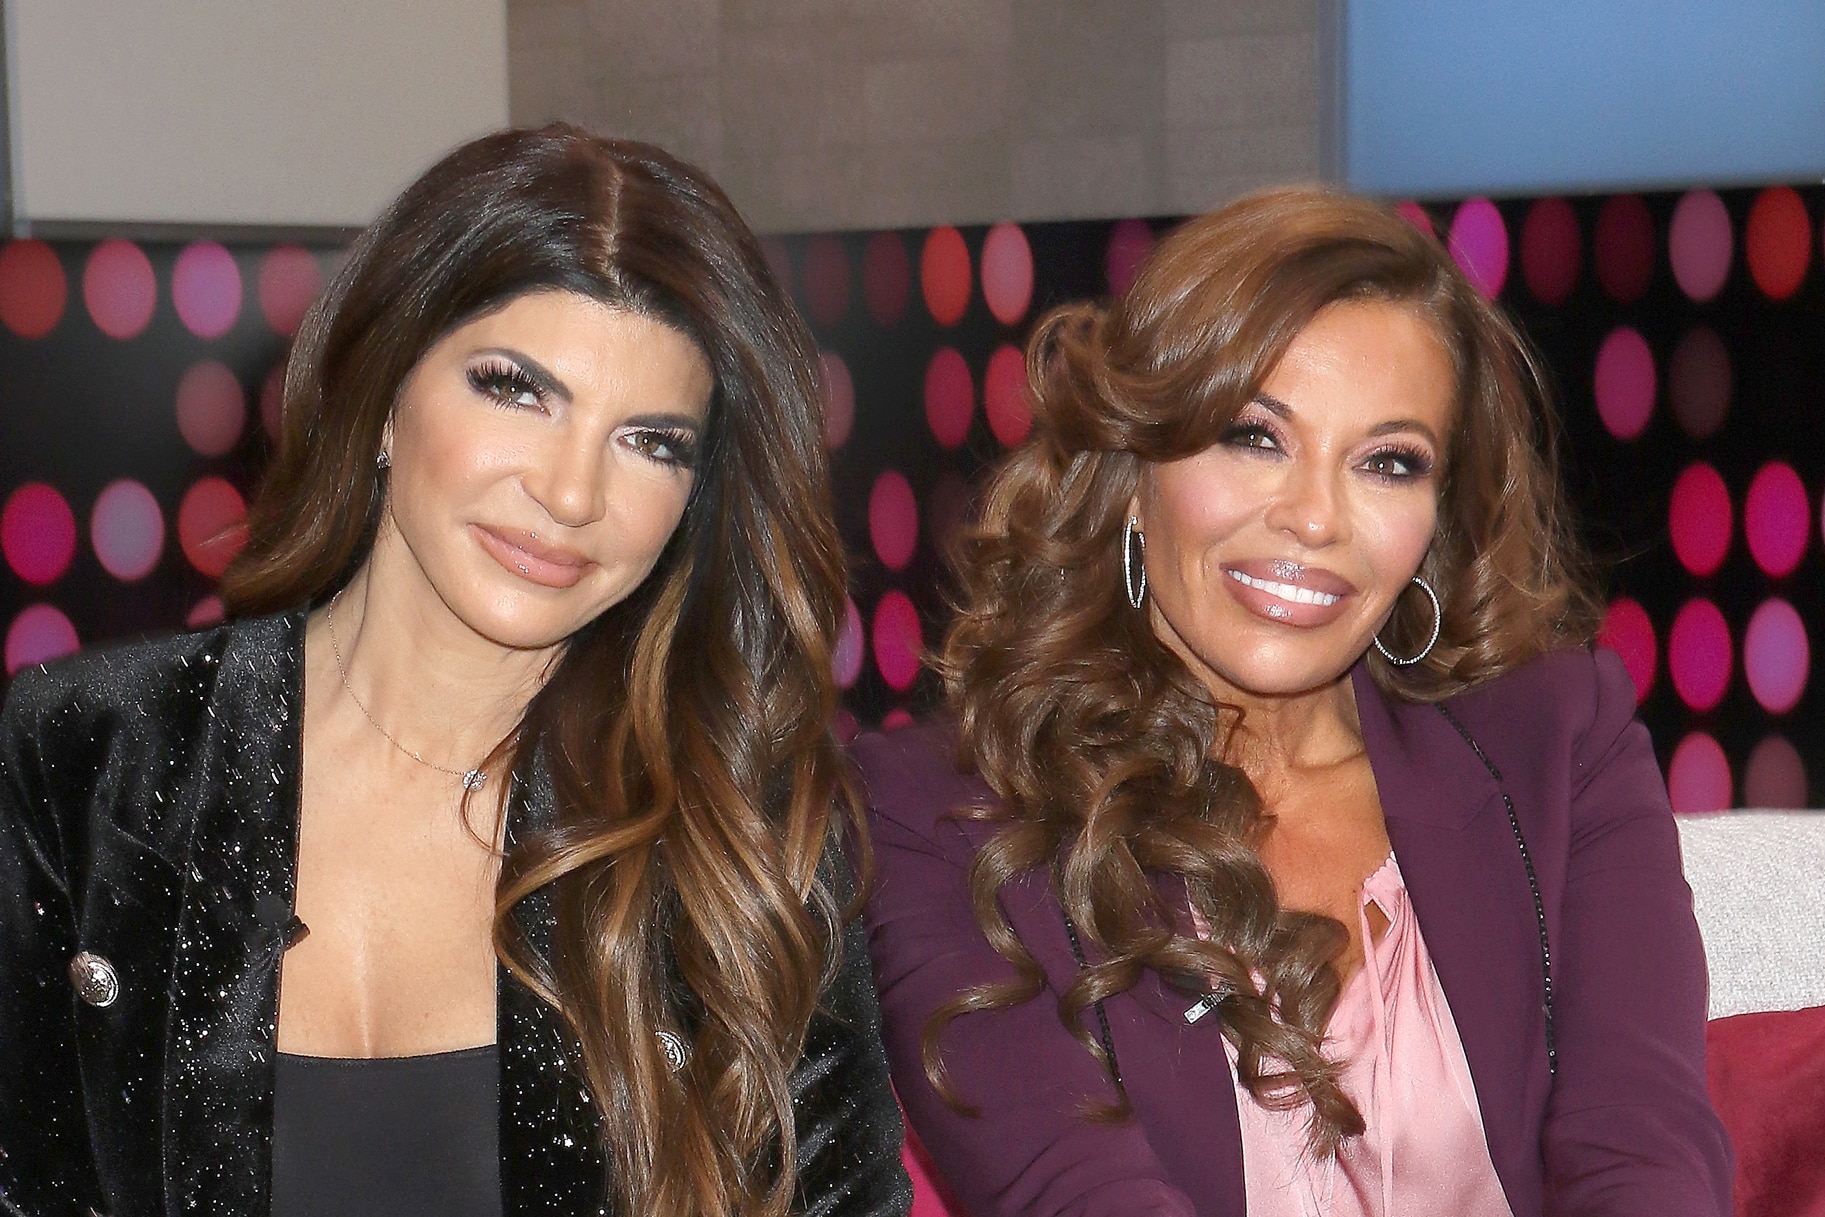 Dolores Catania and Teresa Giudice of Real Housewives of New Jersey pose together